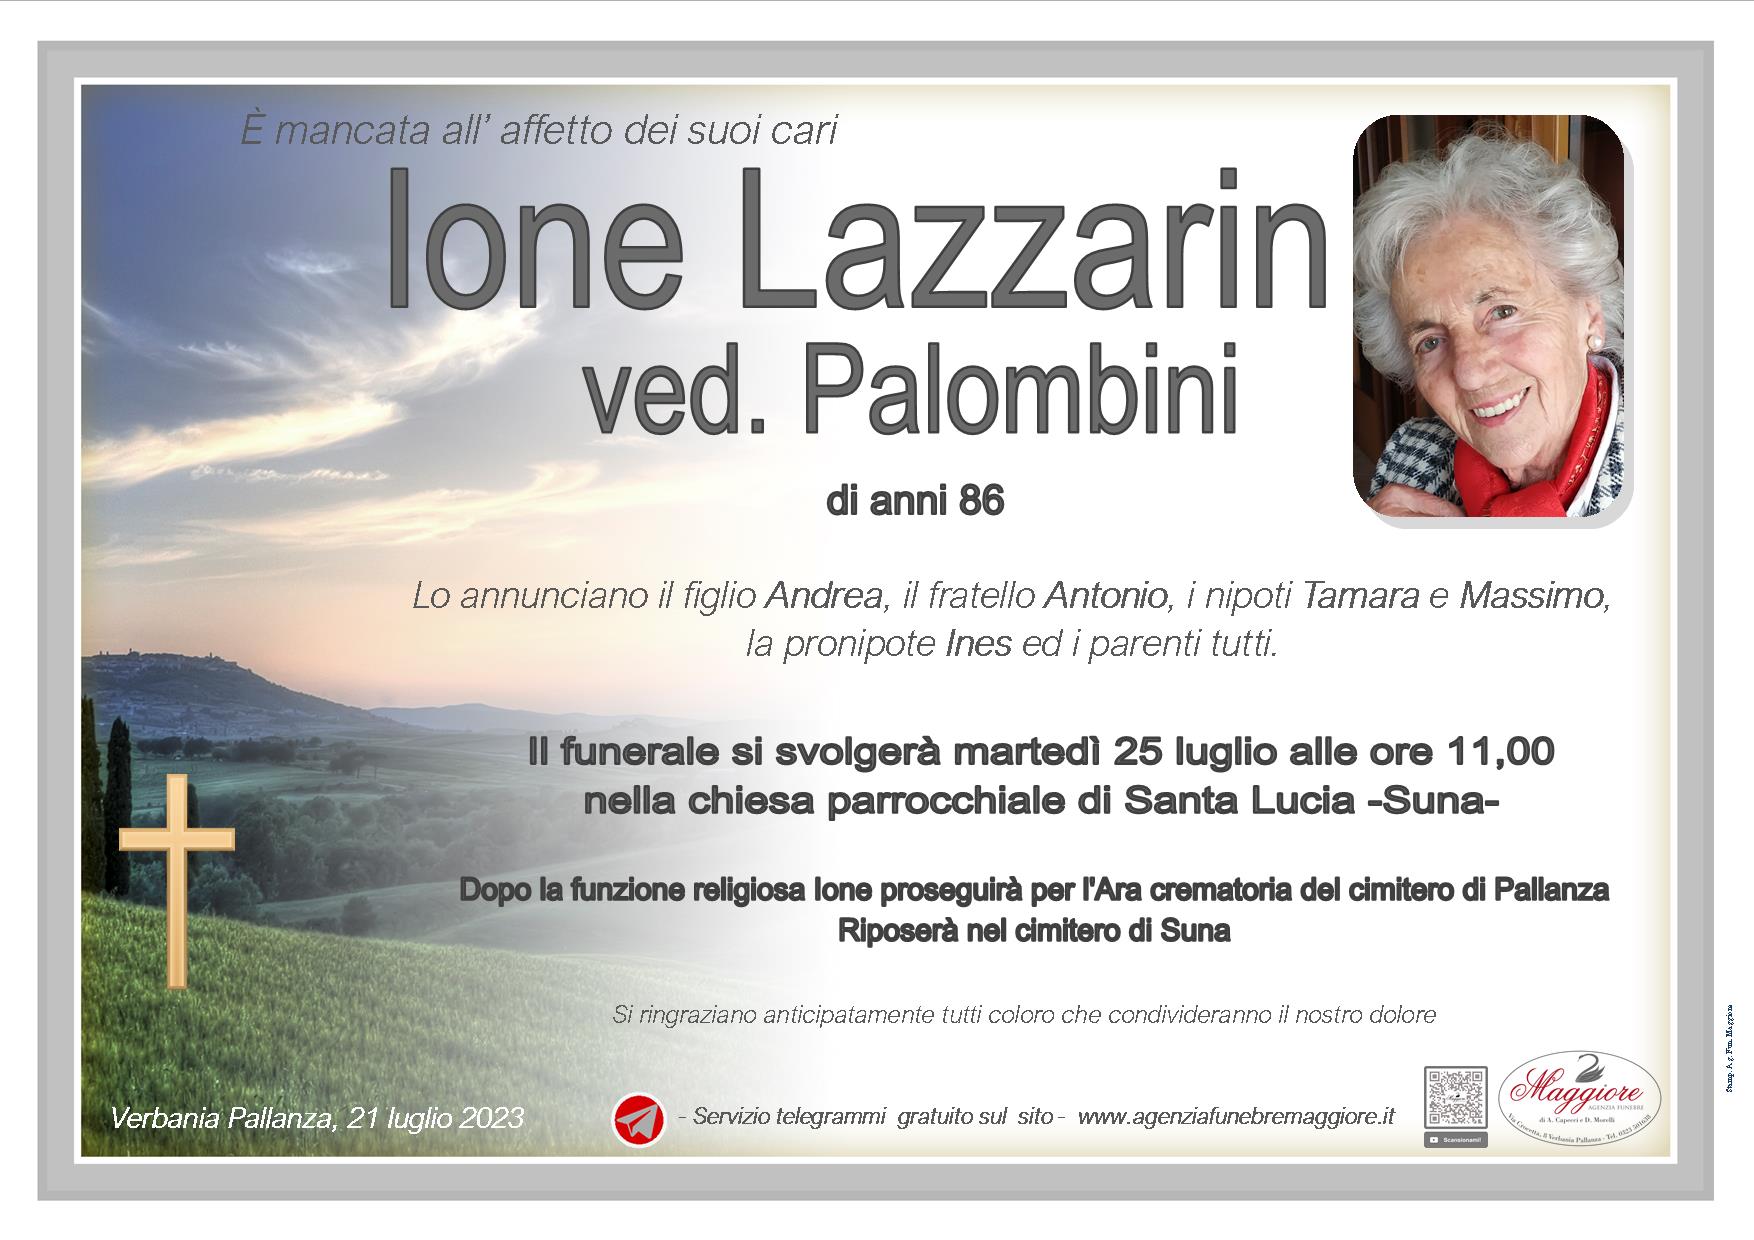 Ione Lazzarin ved. Palombini